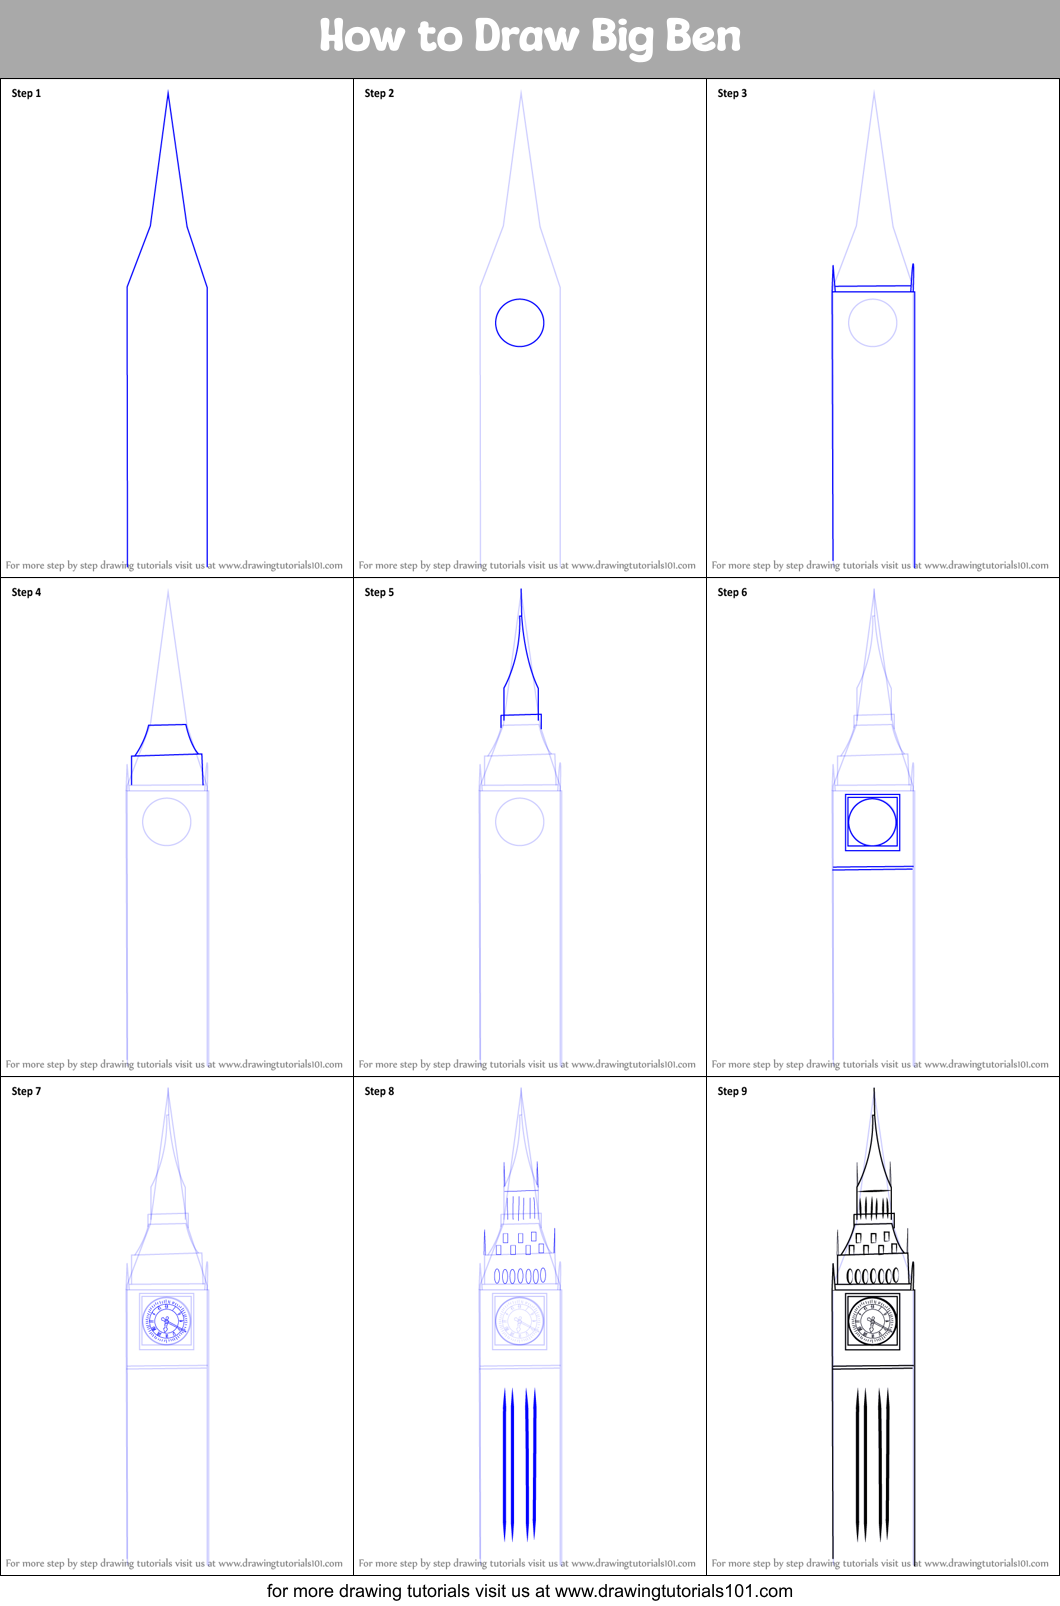 How to Draw Big Ben printable step by step drawing sheet